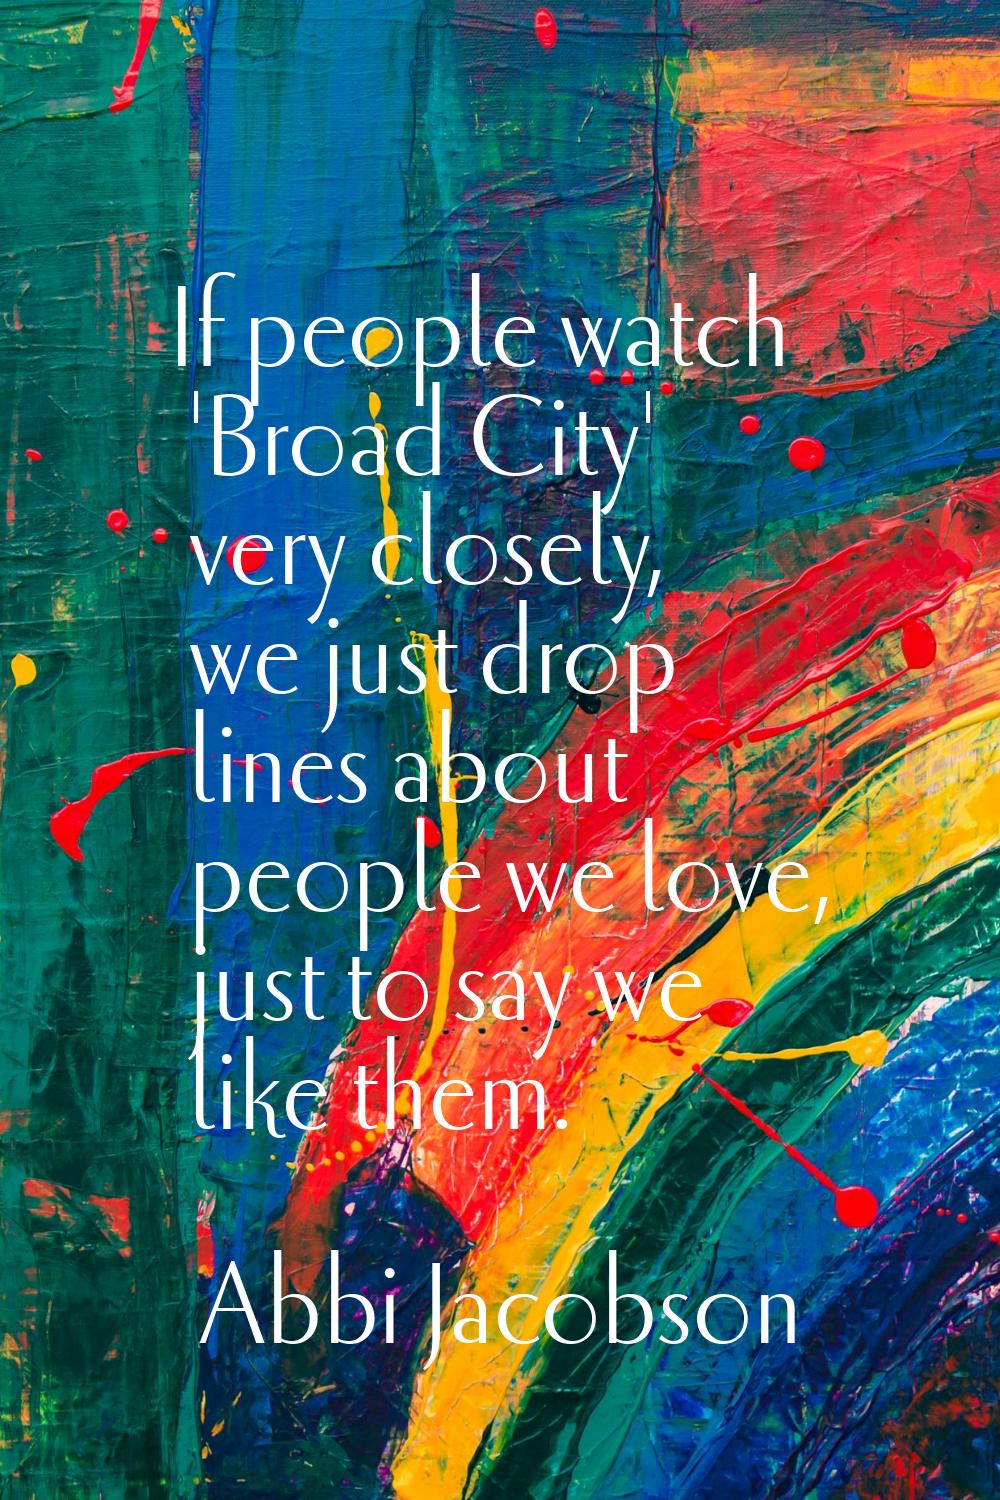 If people watch 'Broad City' very closely, we just drop lines about people we love, just to say we 